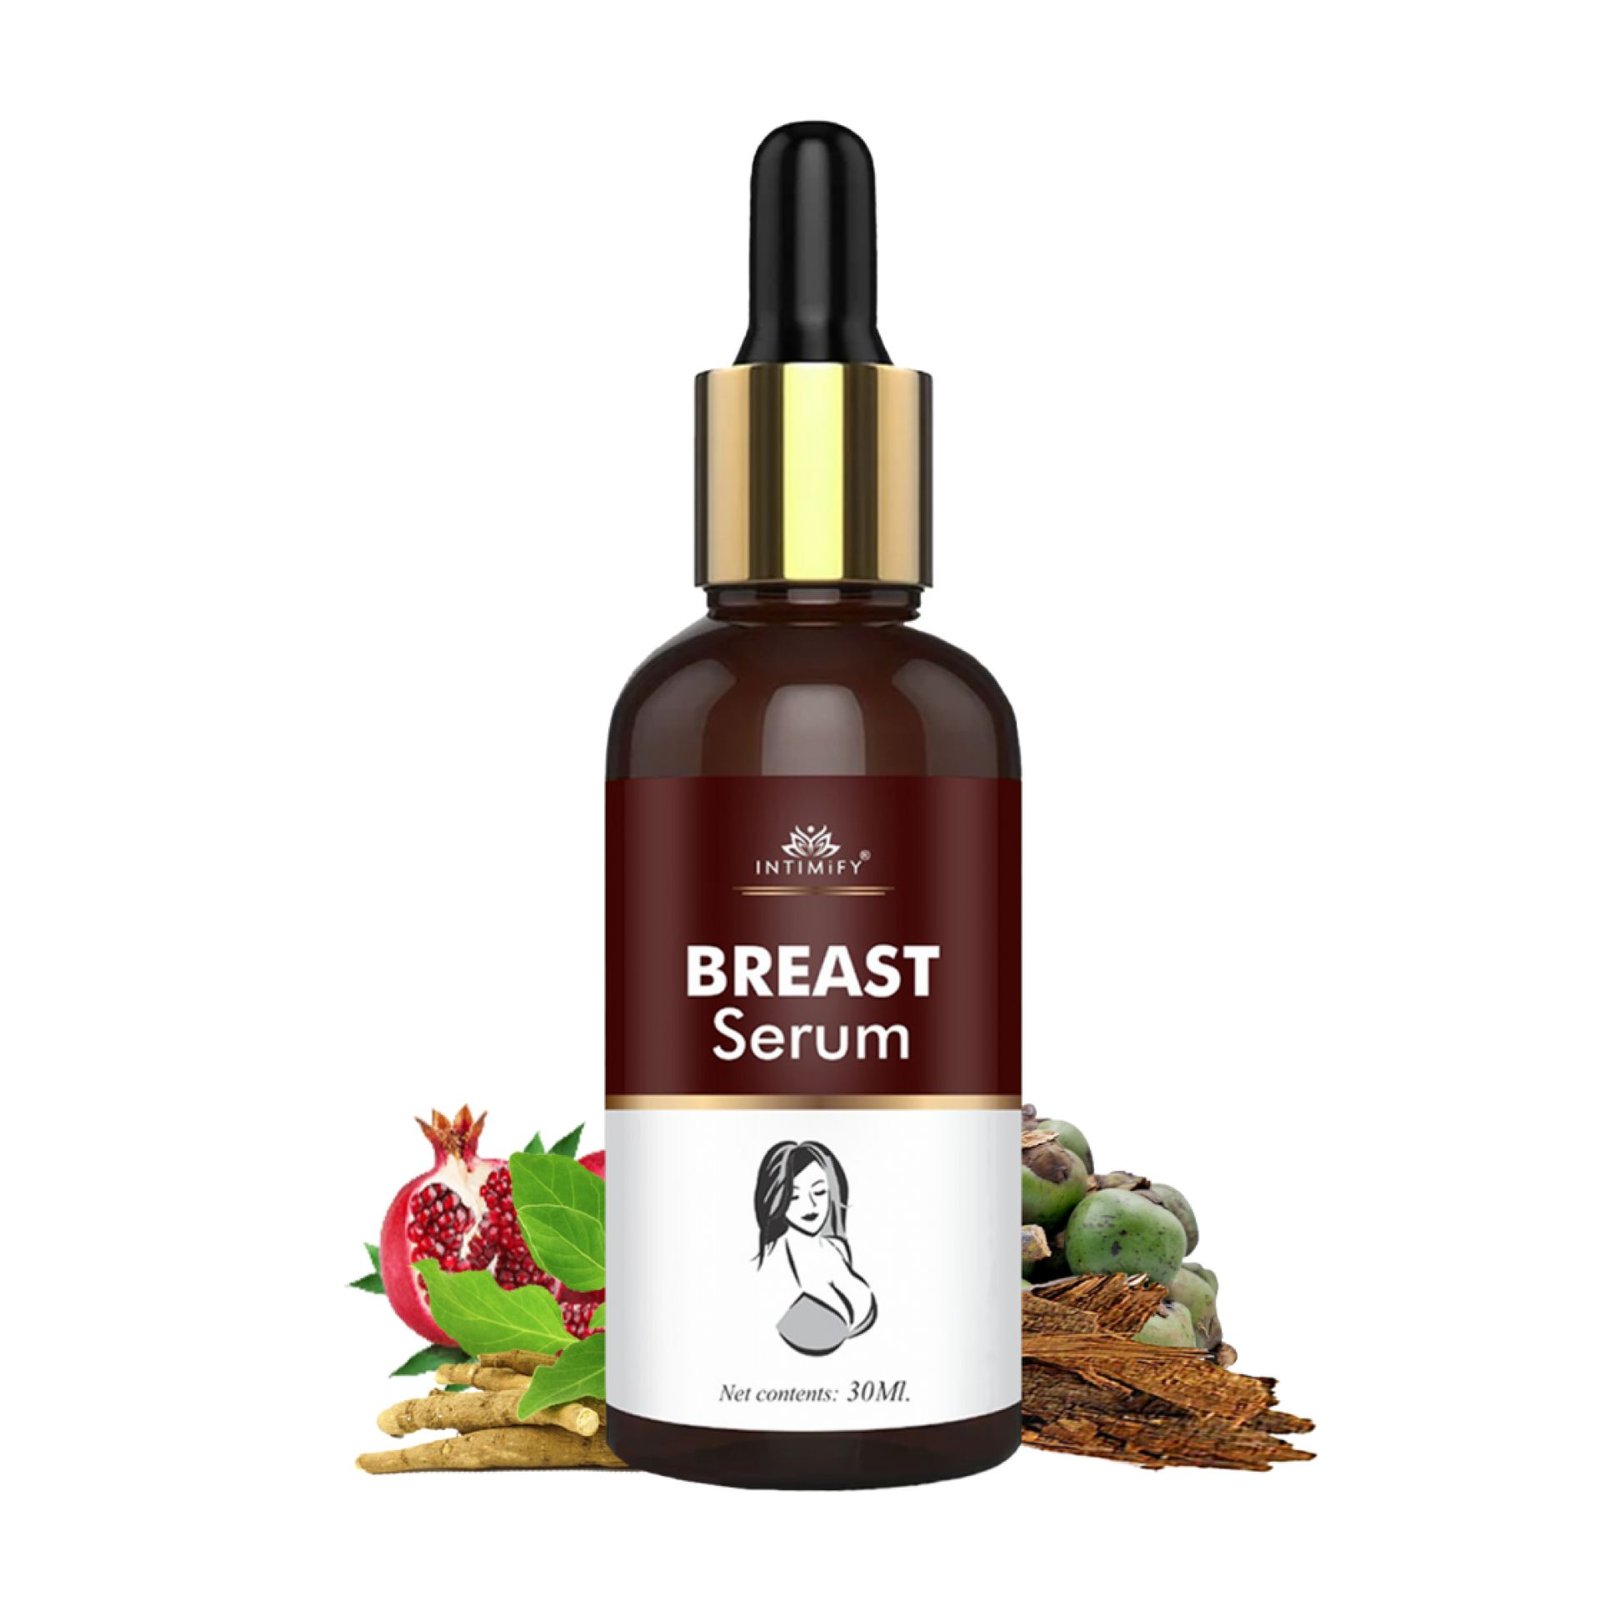 Buy Intimify Breast Serum - 30ml at Rs. 4500 from Likeshop.pk